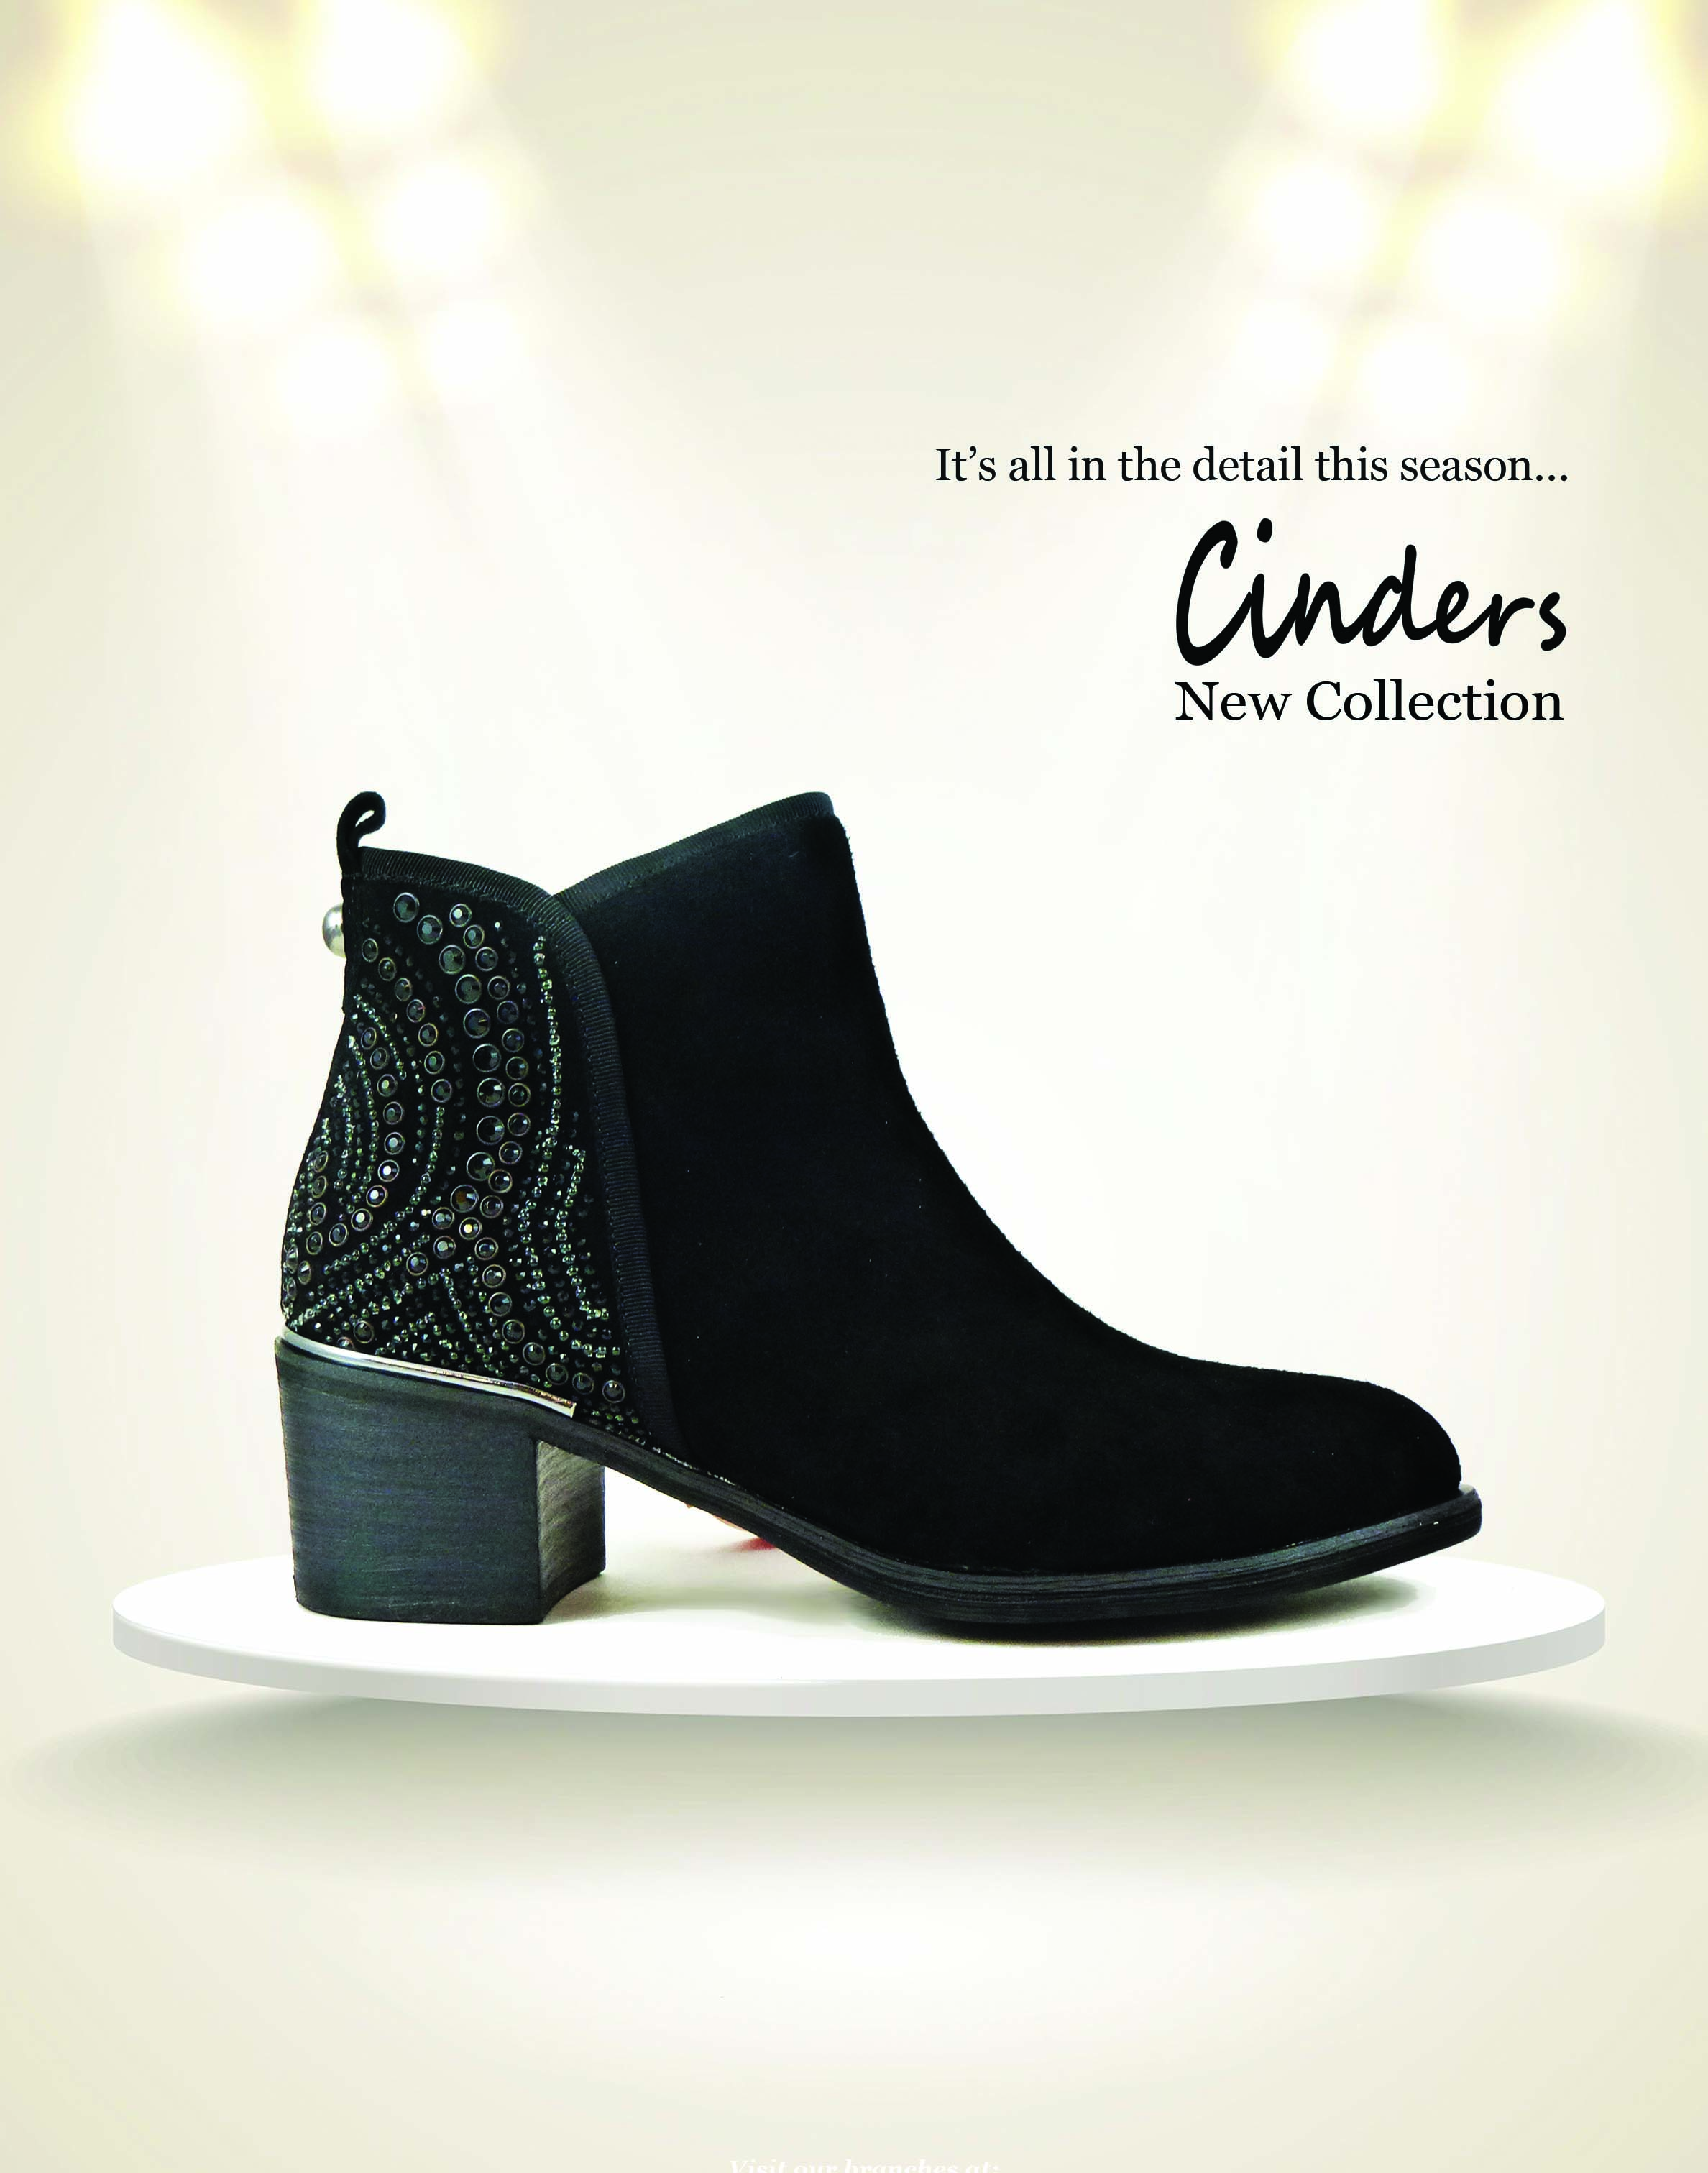 cinders shoes at dunnes stores